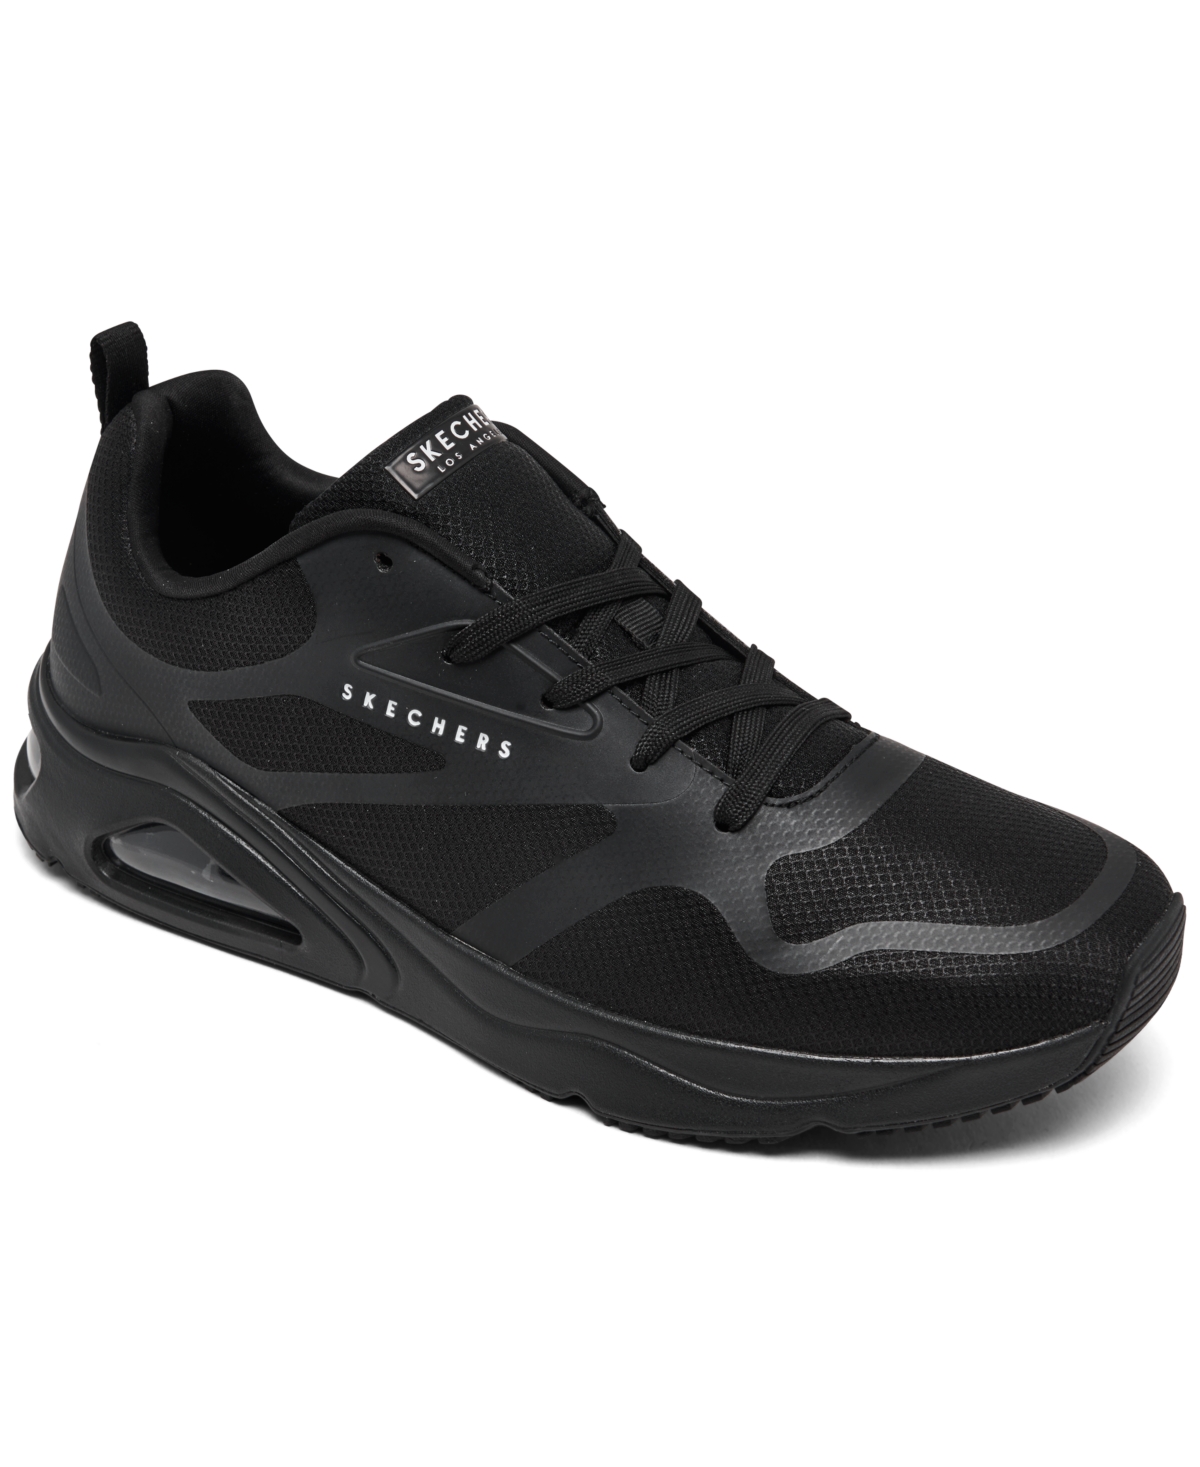 Street Men's Tres-Air Uno - Revolution-Airy Casual Sneakers from Finish Line - Bbk-black